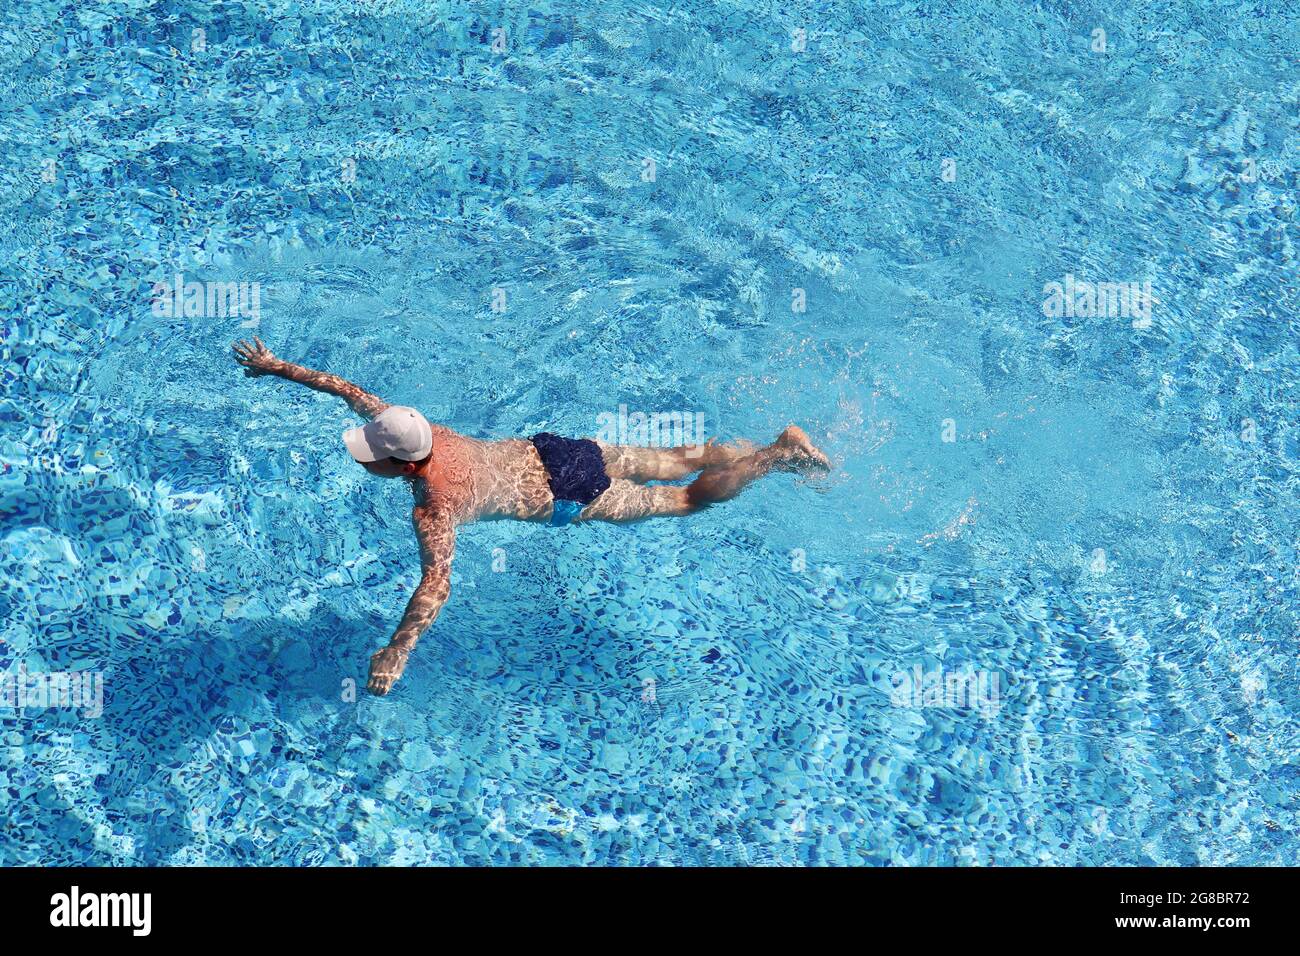 Man in baseball cap swimming in the pool water, top view. Water sports, beach vacation Stock Photo